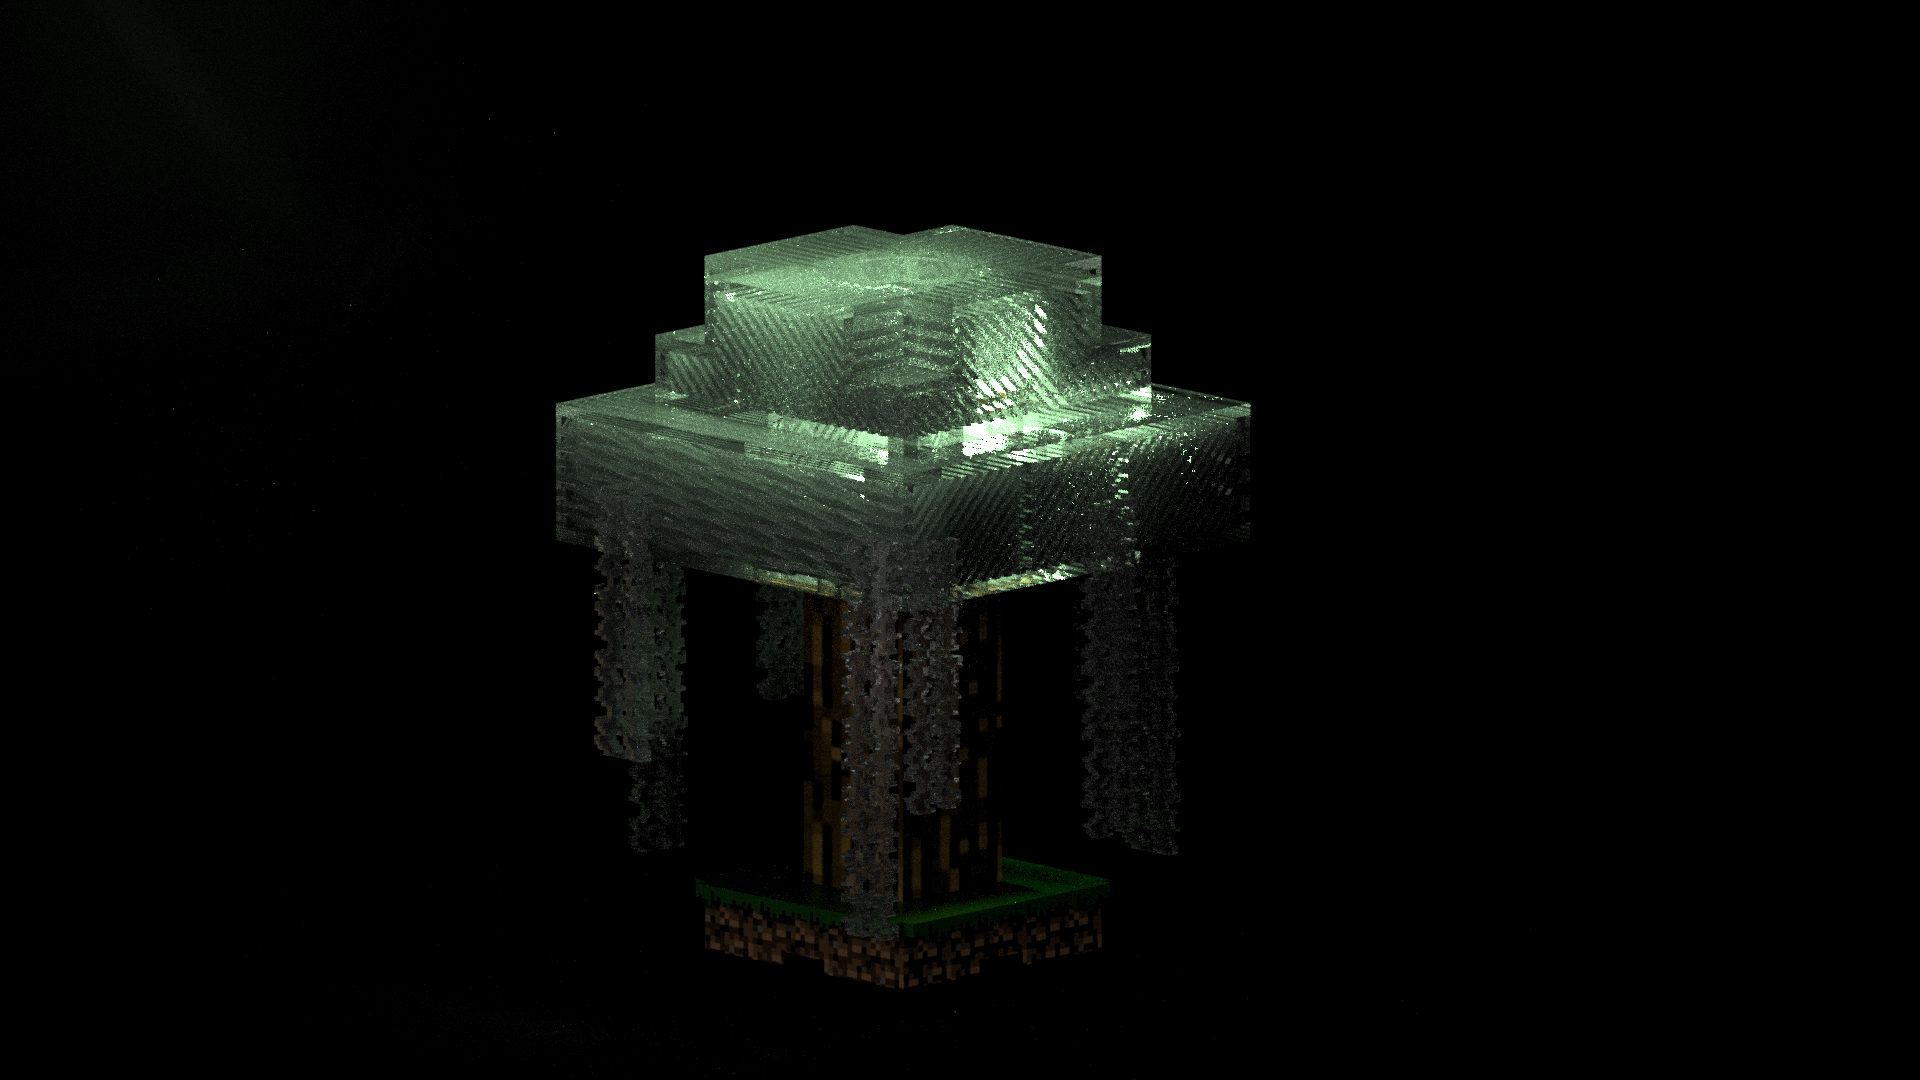 3D Printed Minecraft Swamp Tree Lamp by tylimso5